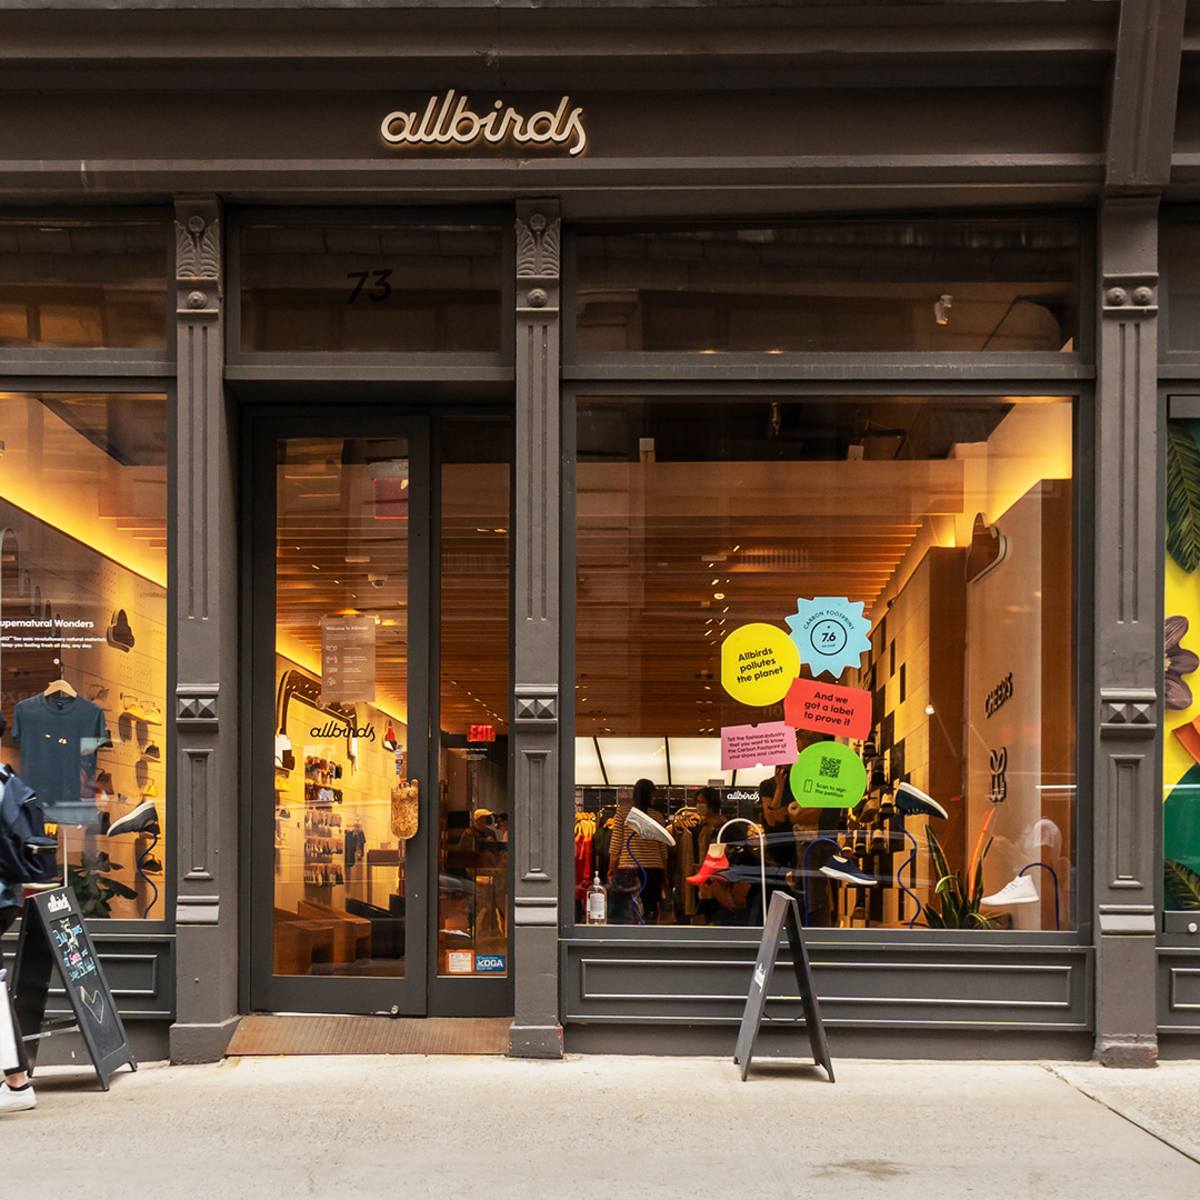 Green Sneakers Hit a Rough Patch: Allbirds Struggles with Sales Slump and Nasdaq Alert